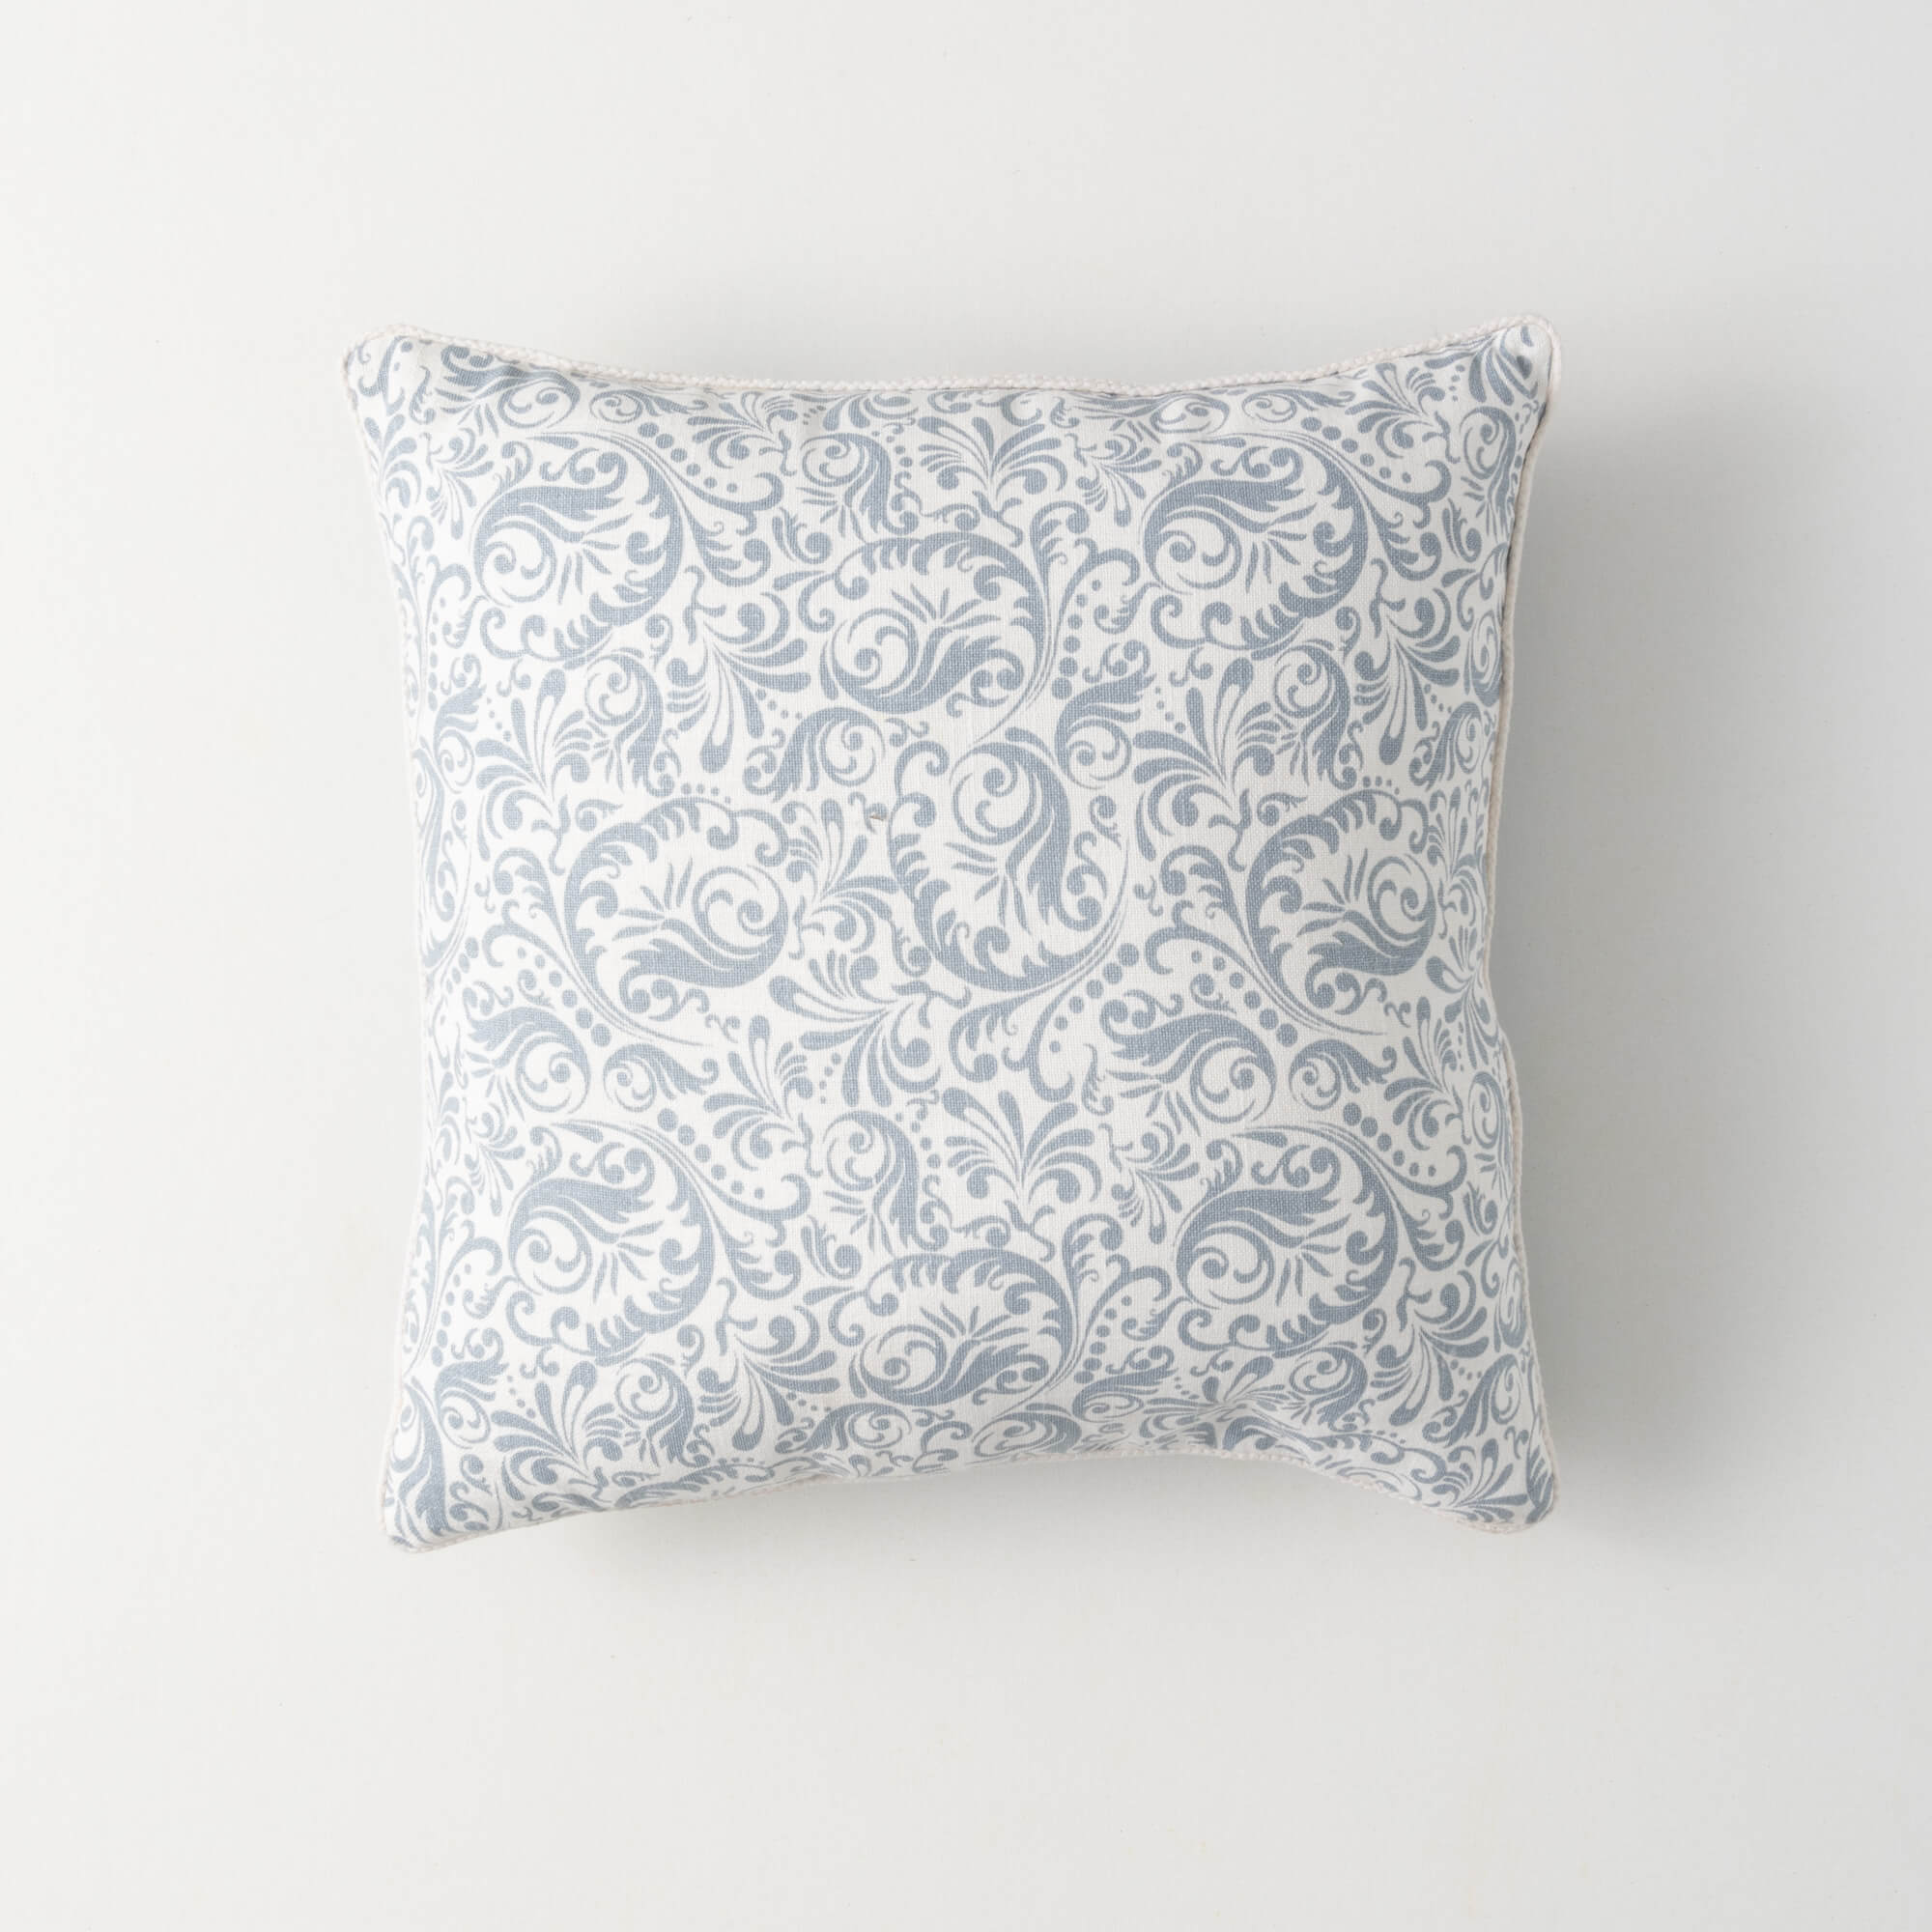 PATTERNED PILLOW